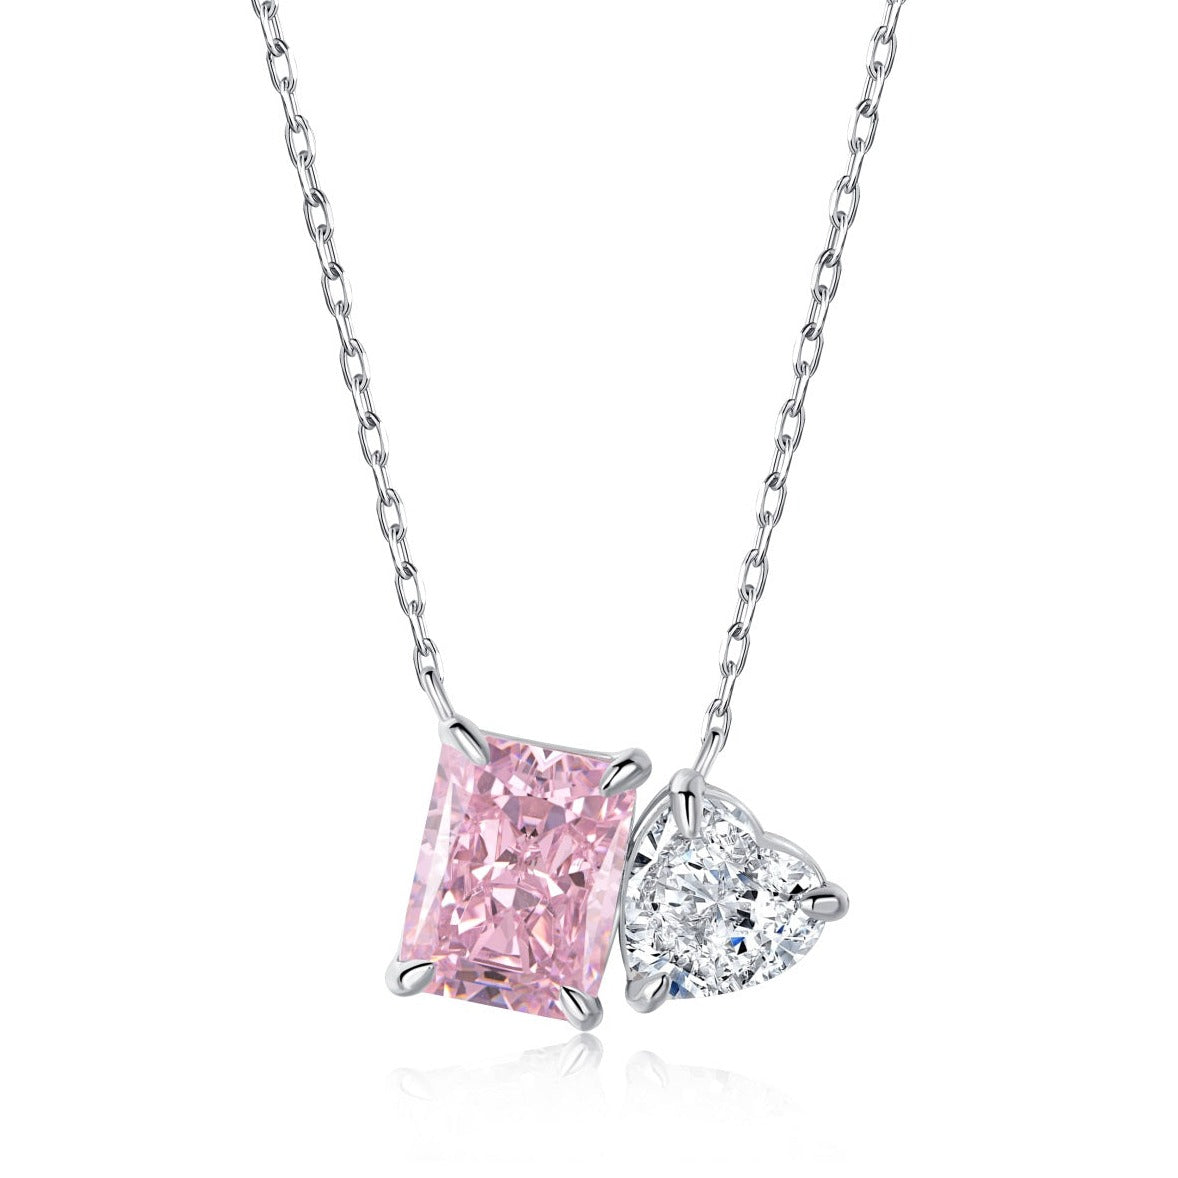 Giselle Sterling Silver Diamond Necklace - Luxora London